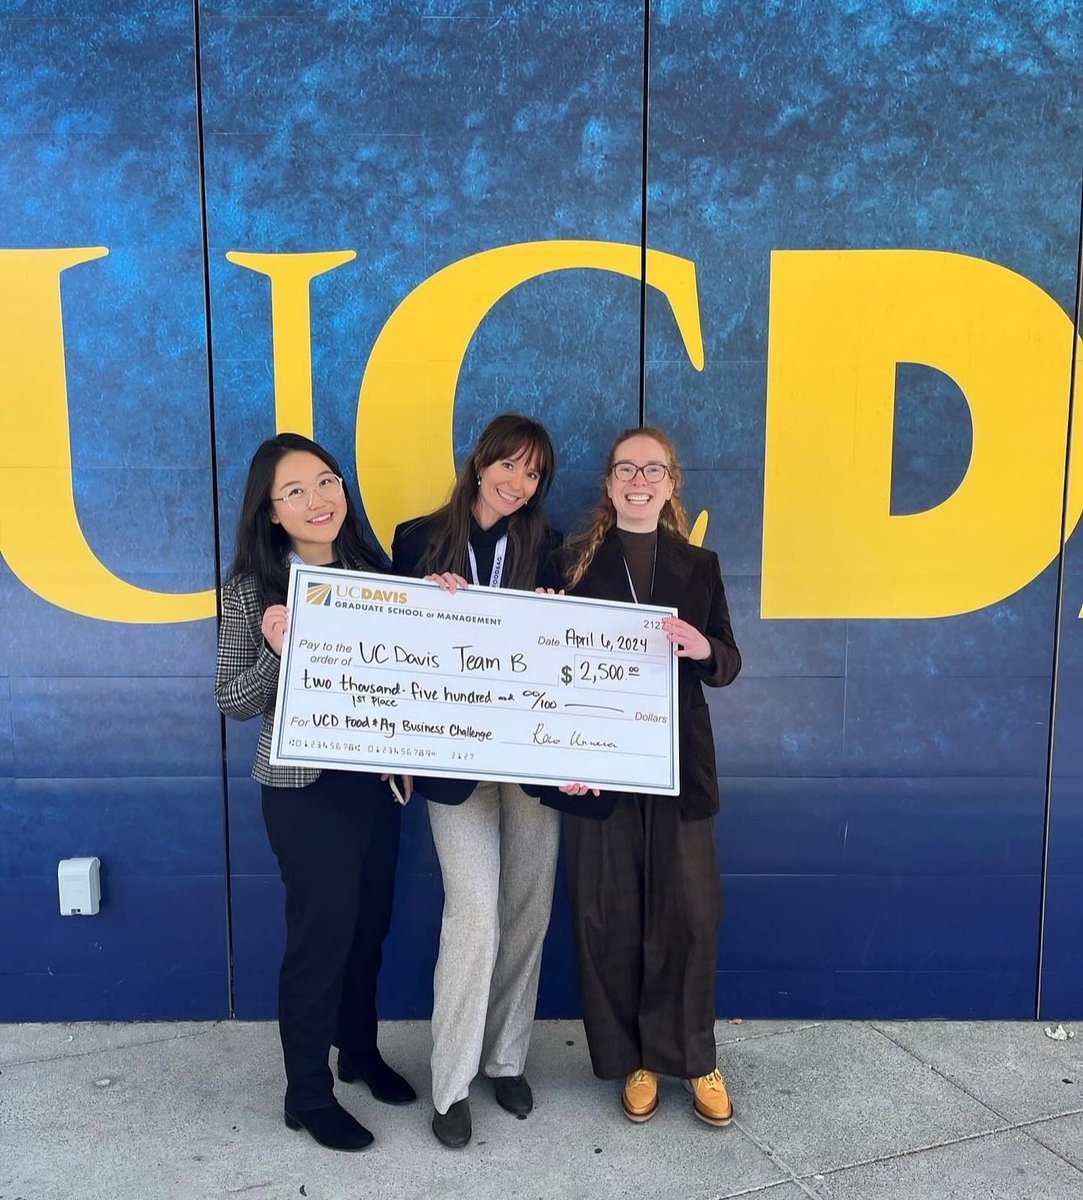 Congrats to a trio of Aggies who took home the Top Prize in the Food & Ag Business Challenge! Multiple university teams competed to present recommendations for a case study presented by @hmc_usa. Meet the team from GSM + @UCDavisPlants: bit.ly/3wfX23z #UCDavis #GoAgs